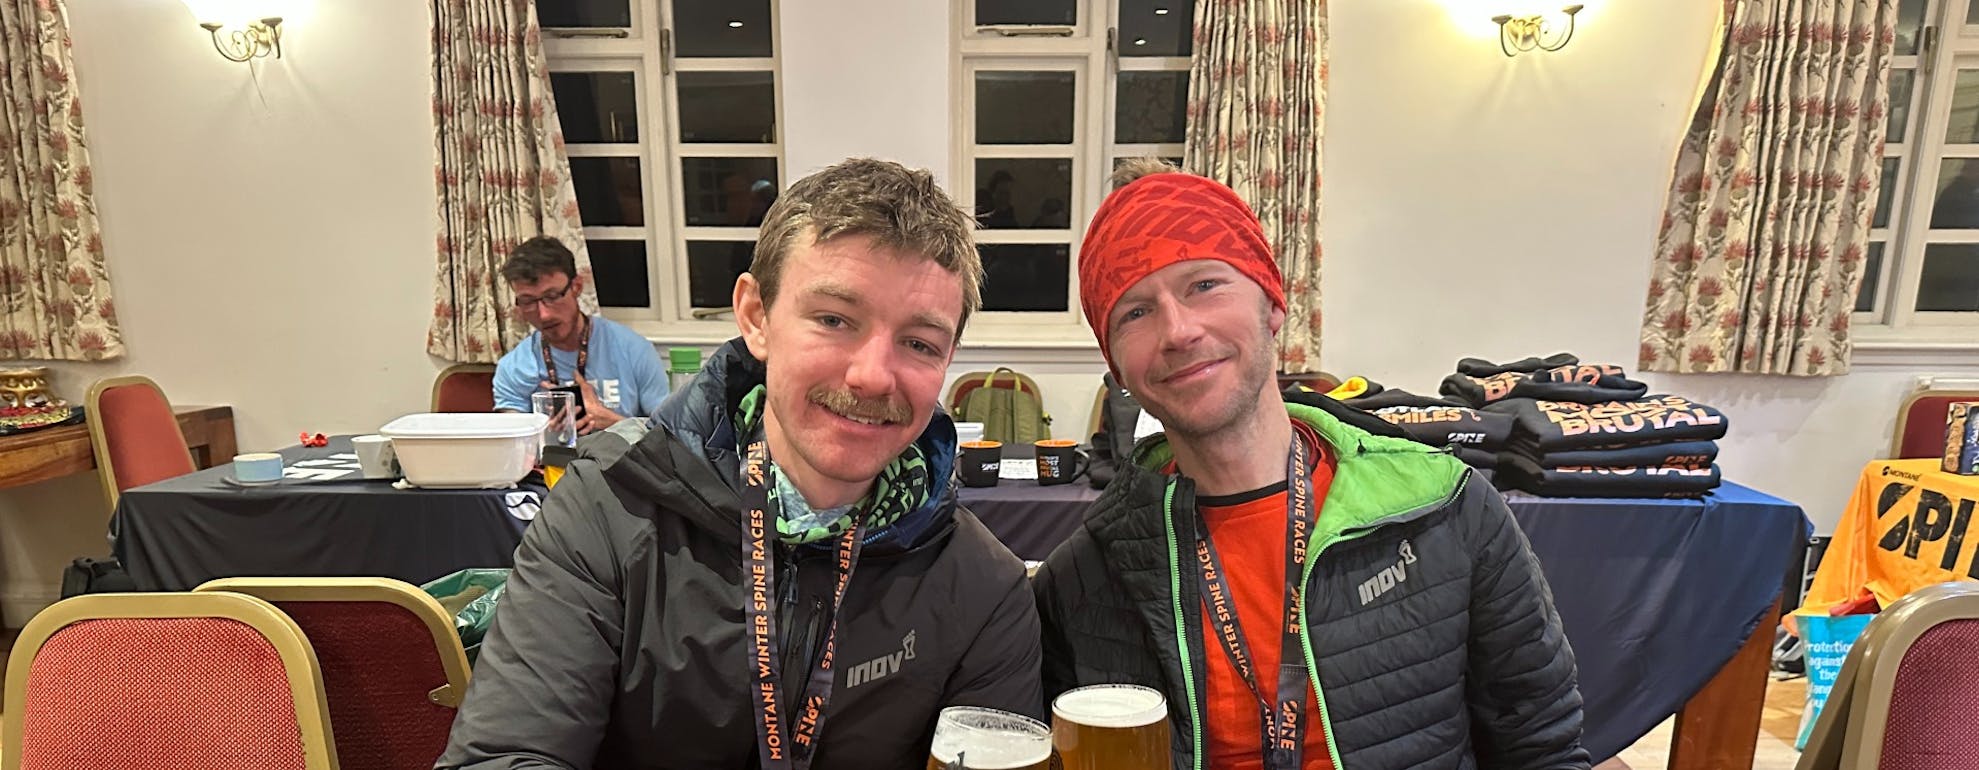 Just how brutal is the Spine Race?